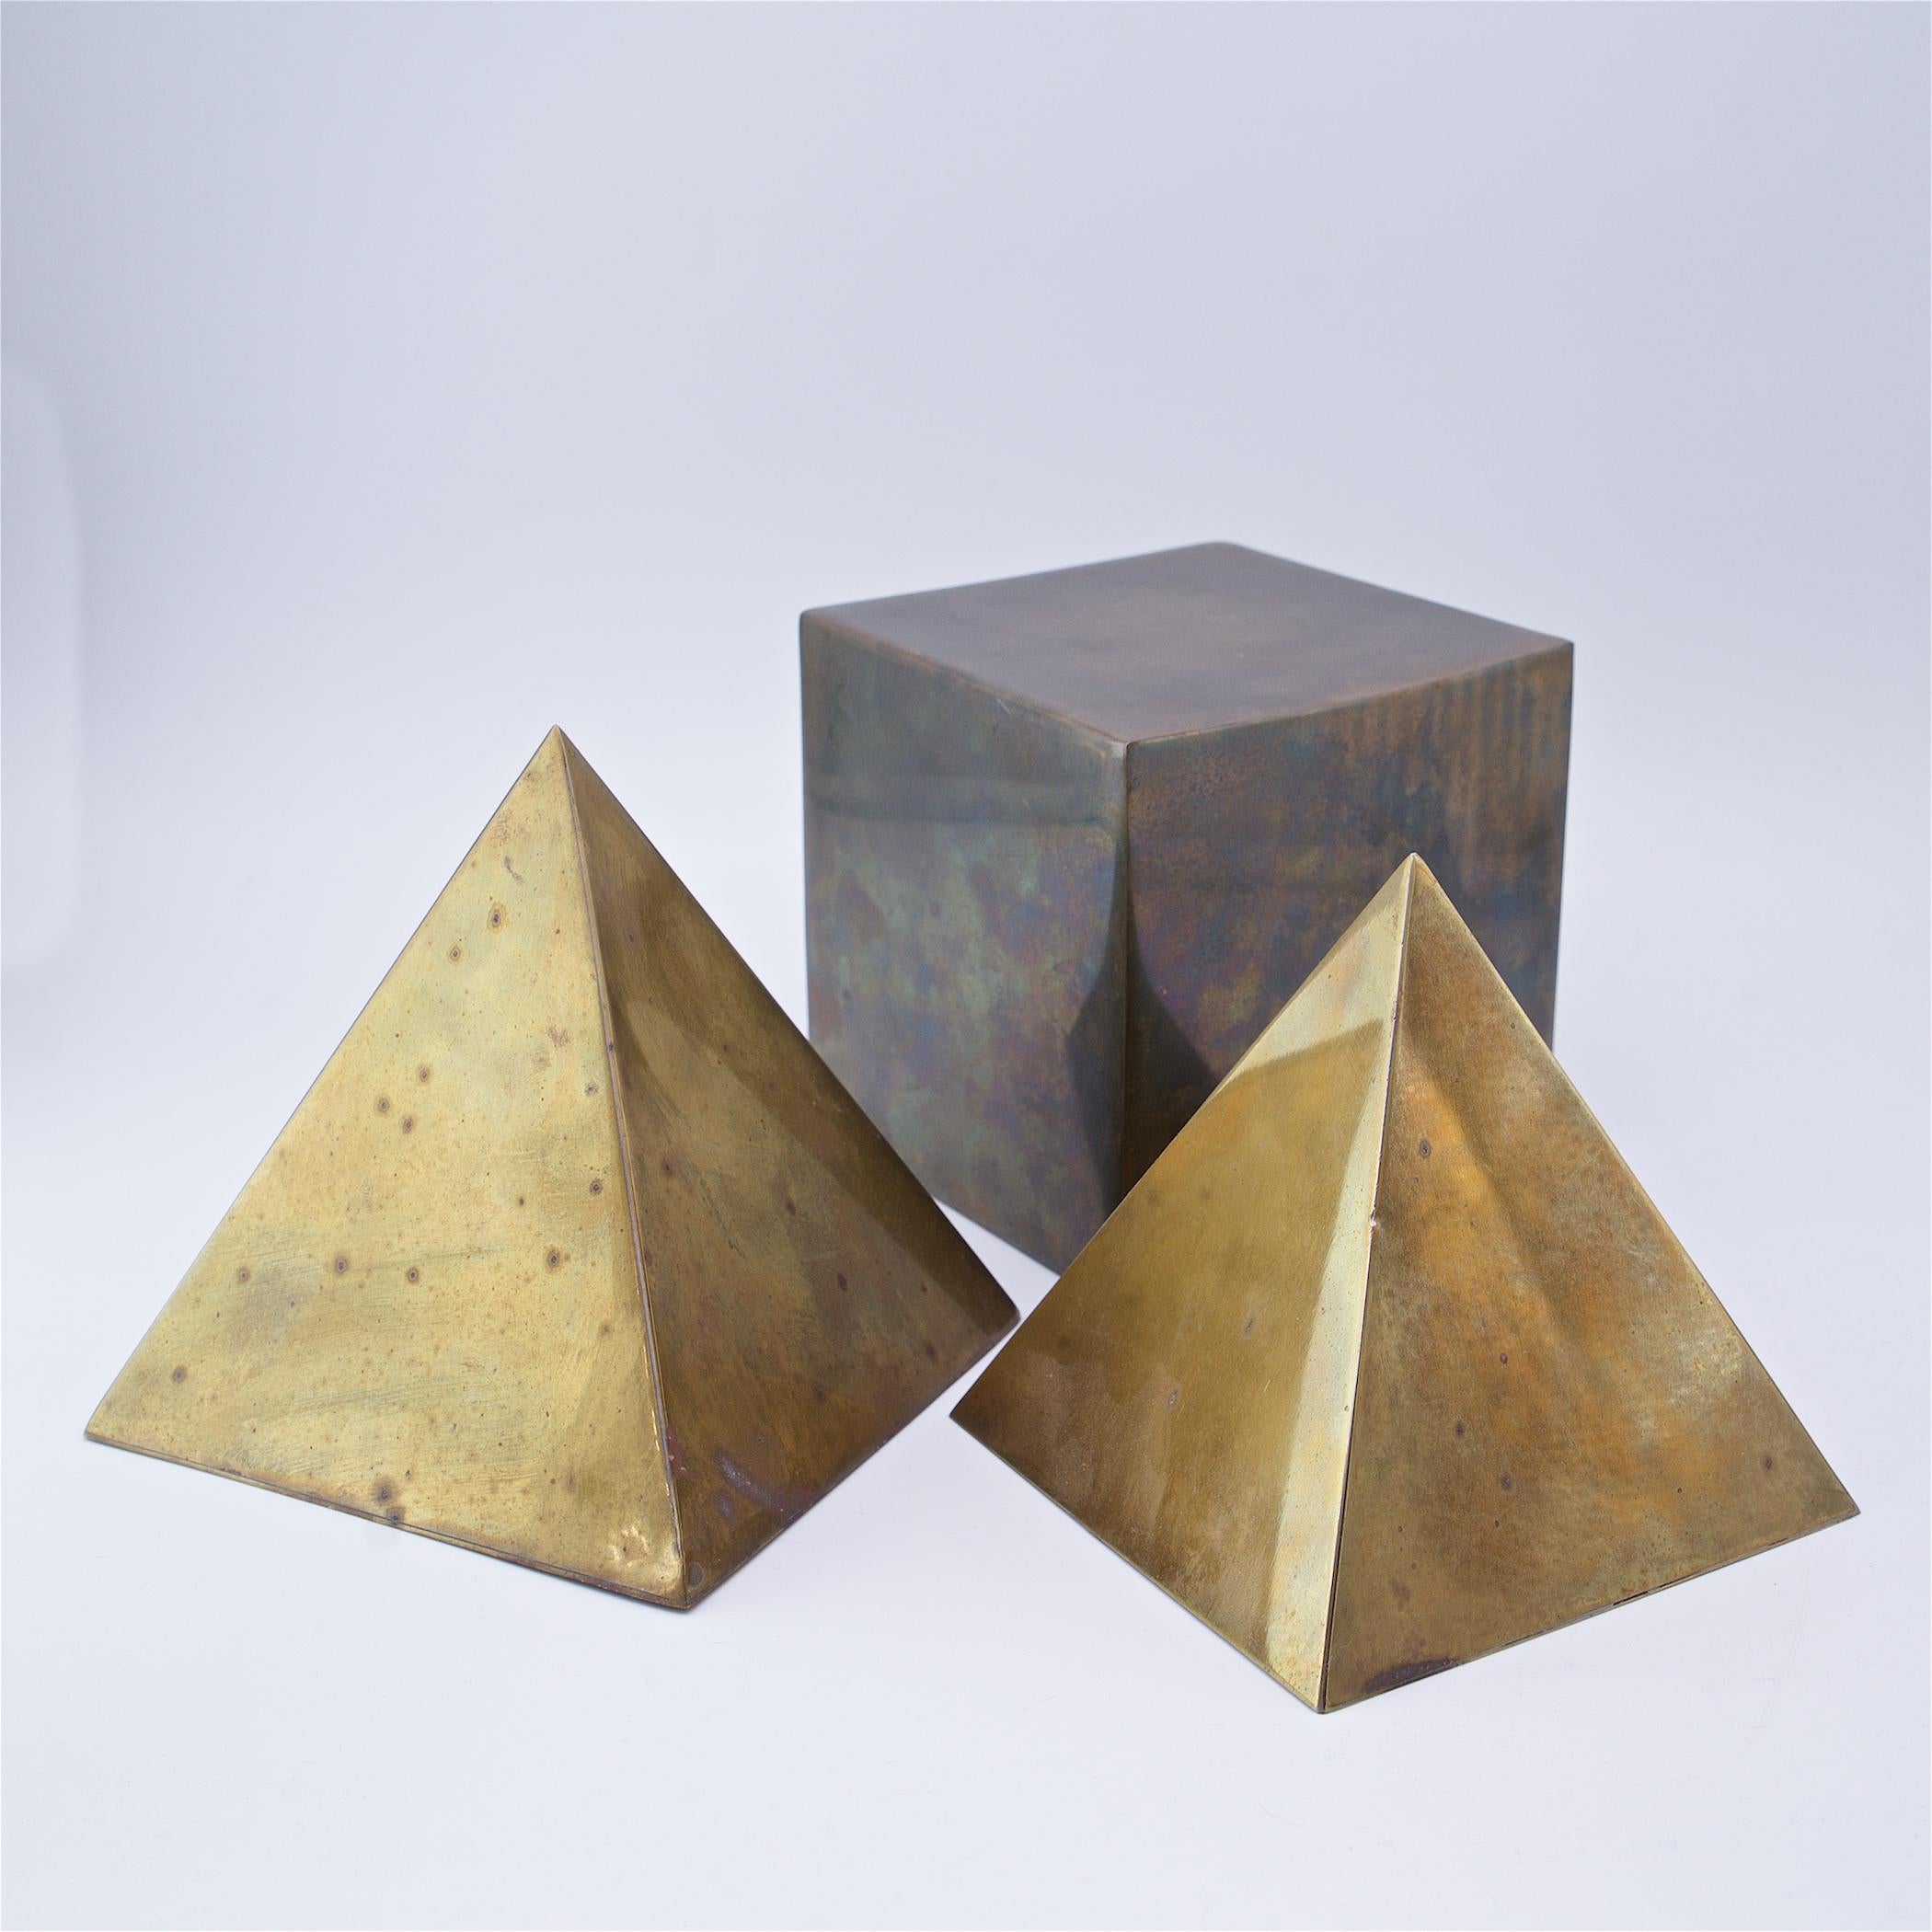 Sarreid Ltd. marked brass abstract shapes, Italy, circa 1970s. 

Sm pyramid W: 5 1/4 X D: 5 1/4 X H: 5 1/4 in.
Md pyramid W: 5 5/8 X D: 5 5/8 X H: 6 in.
Cube W: 5 1/4 X D: 5 1/4 X H: 5 1/4 in.

Showing wear, heavy patina to brass, this could